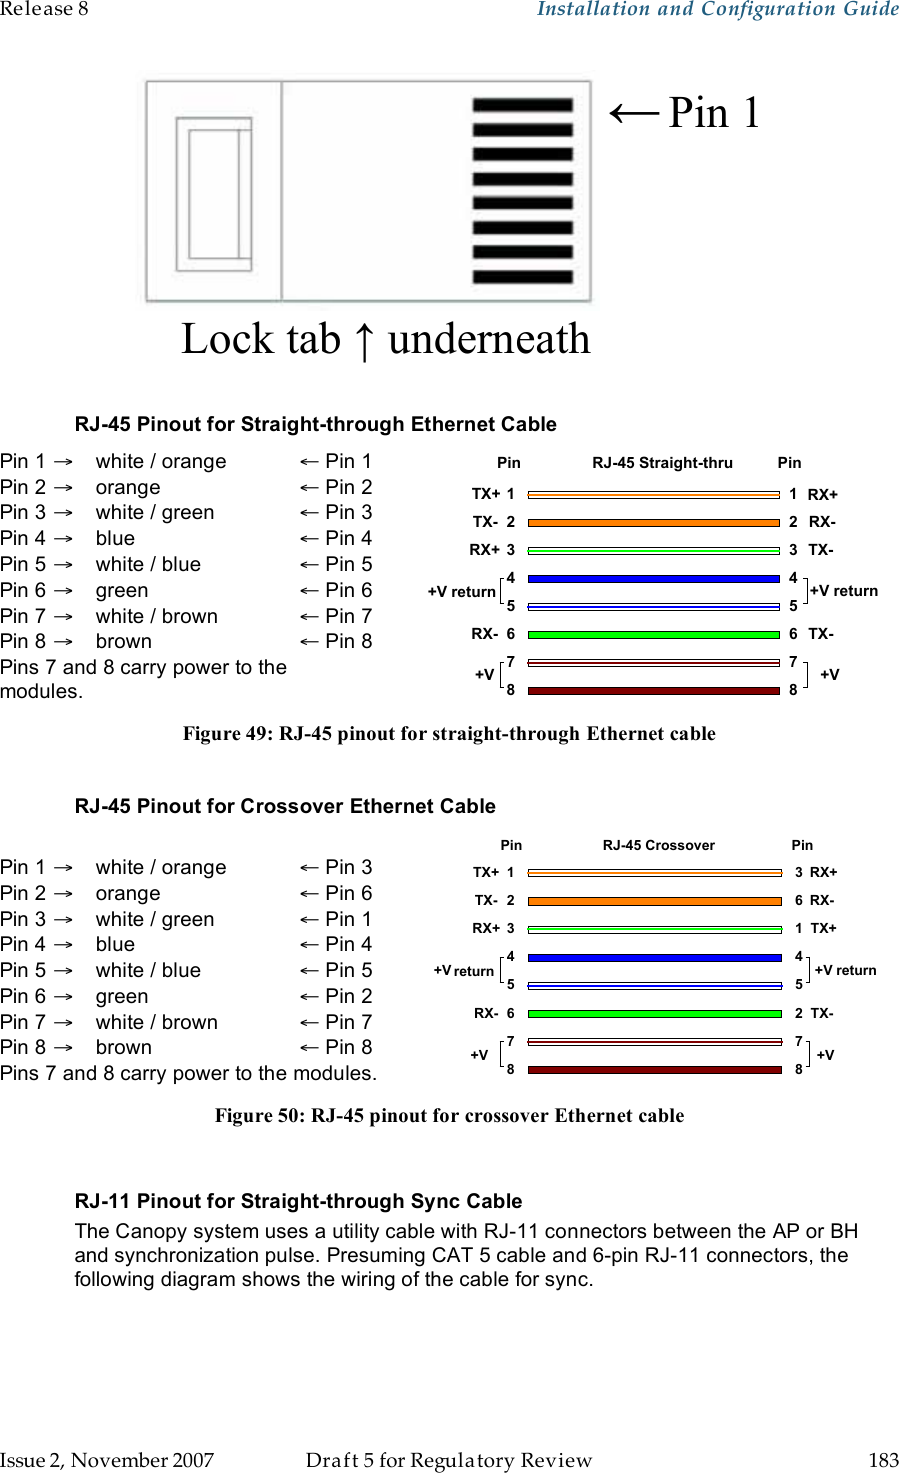 Release 8    Installation and Configuration Guide   Issue 2, November 2007  Draft 5 for Regulatory Review  183          Lock tab ↑ underneath ← Pin 1  RJ-45 Pinout for Straight-through Ethernet Cable Pin 1 →    white / orange     ← Pin 1 Pin 2 →    orange        ← Pin 2 Pin 3 →    white / green    ← Pin 3 Pin 4 →    blue      ← Pin 4 Pin 5 →    white / blue    ← Pin 5 Pin 6 →    green        ← Pin 6 Pin 7 →    white / brown   ← Pin 7 Pin 8 →    brown        ← Pin 8 Pins 7 and 8 carry power to the modules.  1234567812345678TX+TX-RX+RX-TX-TX-RX+RX-+V return+VPin PinRJ-45 Straight-thru+V return+V Figure 49: RJ-45 pinout for straight-through Ethernet cable  RJ-45 Pinout for Crossover Ethernet Cable  Pin 1 →    white / orange      ← Pin 3 Pin 2 →    orange        ← Pin 6 Pin 3 →    white / green    ← Pin 1 Pin 4 →    blue      ← Pin 4 Pin 5 →    white / blue    ← Pin 5 Pin 6 →    green        ← Pin 2 Pin 7 →    white / brown   ← Pin 7 Pin 8 →    brown        ← Pin 8 Pins 7 and 8 carry power to the modules.  78TX+TX-RX+RX-36145278RX+RX-TX+TX-123456+Vreturn+V +V+VreturnPin PinRJ-45 Crossover Figure 50: RJ-45 pinout for crossover Ethernet cable  RJ-11 Pinout for Straight-through Sync Cable The Canopy system uses a utility cable with RJ-11 connectors between the AP or BH and synchronization pulse. Presuming CAT 5 cable and 6-pin RJ-11 connectors, the following diagram shows the wiring of the cable for sync. 